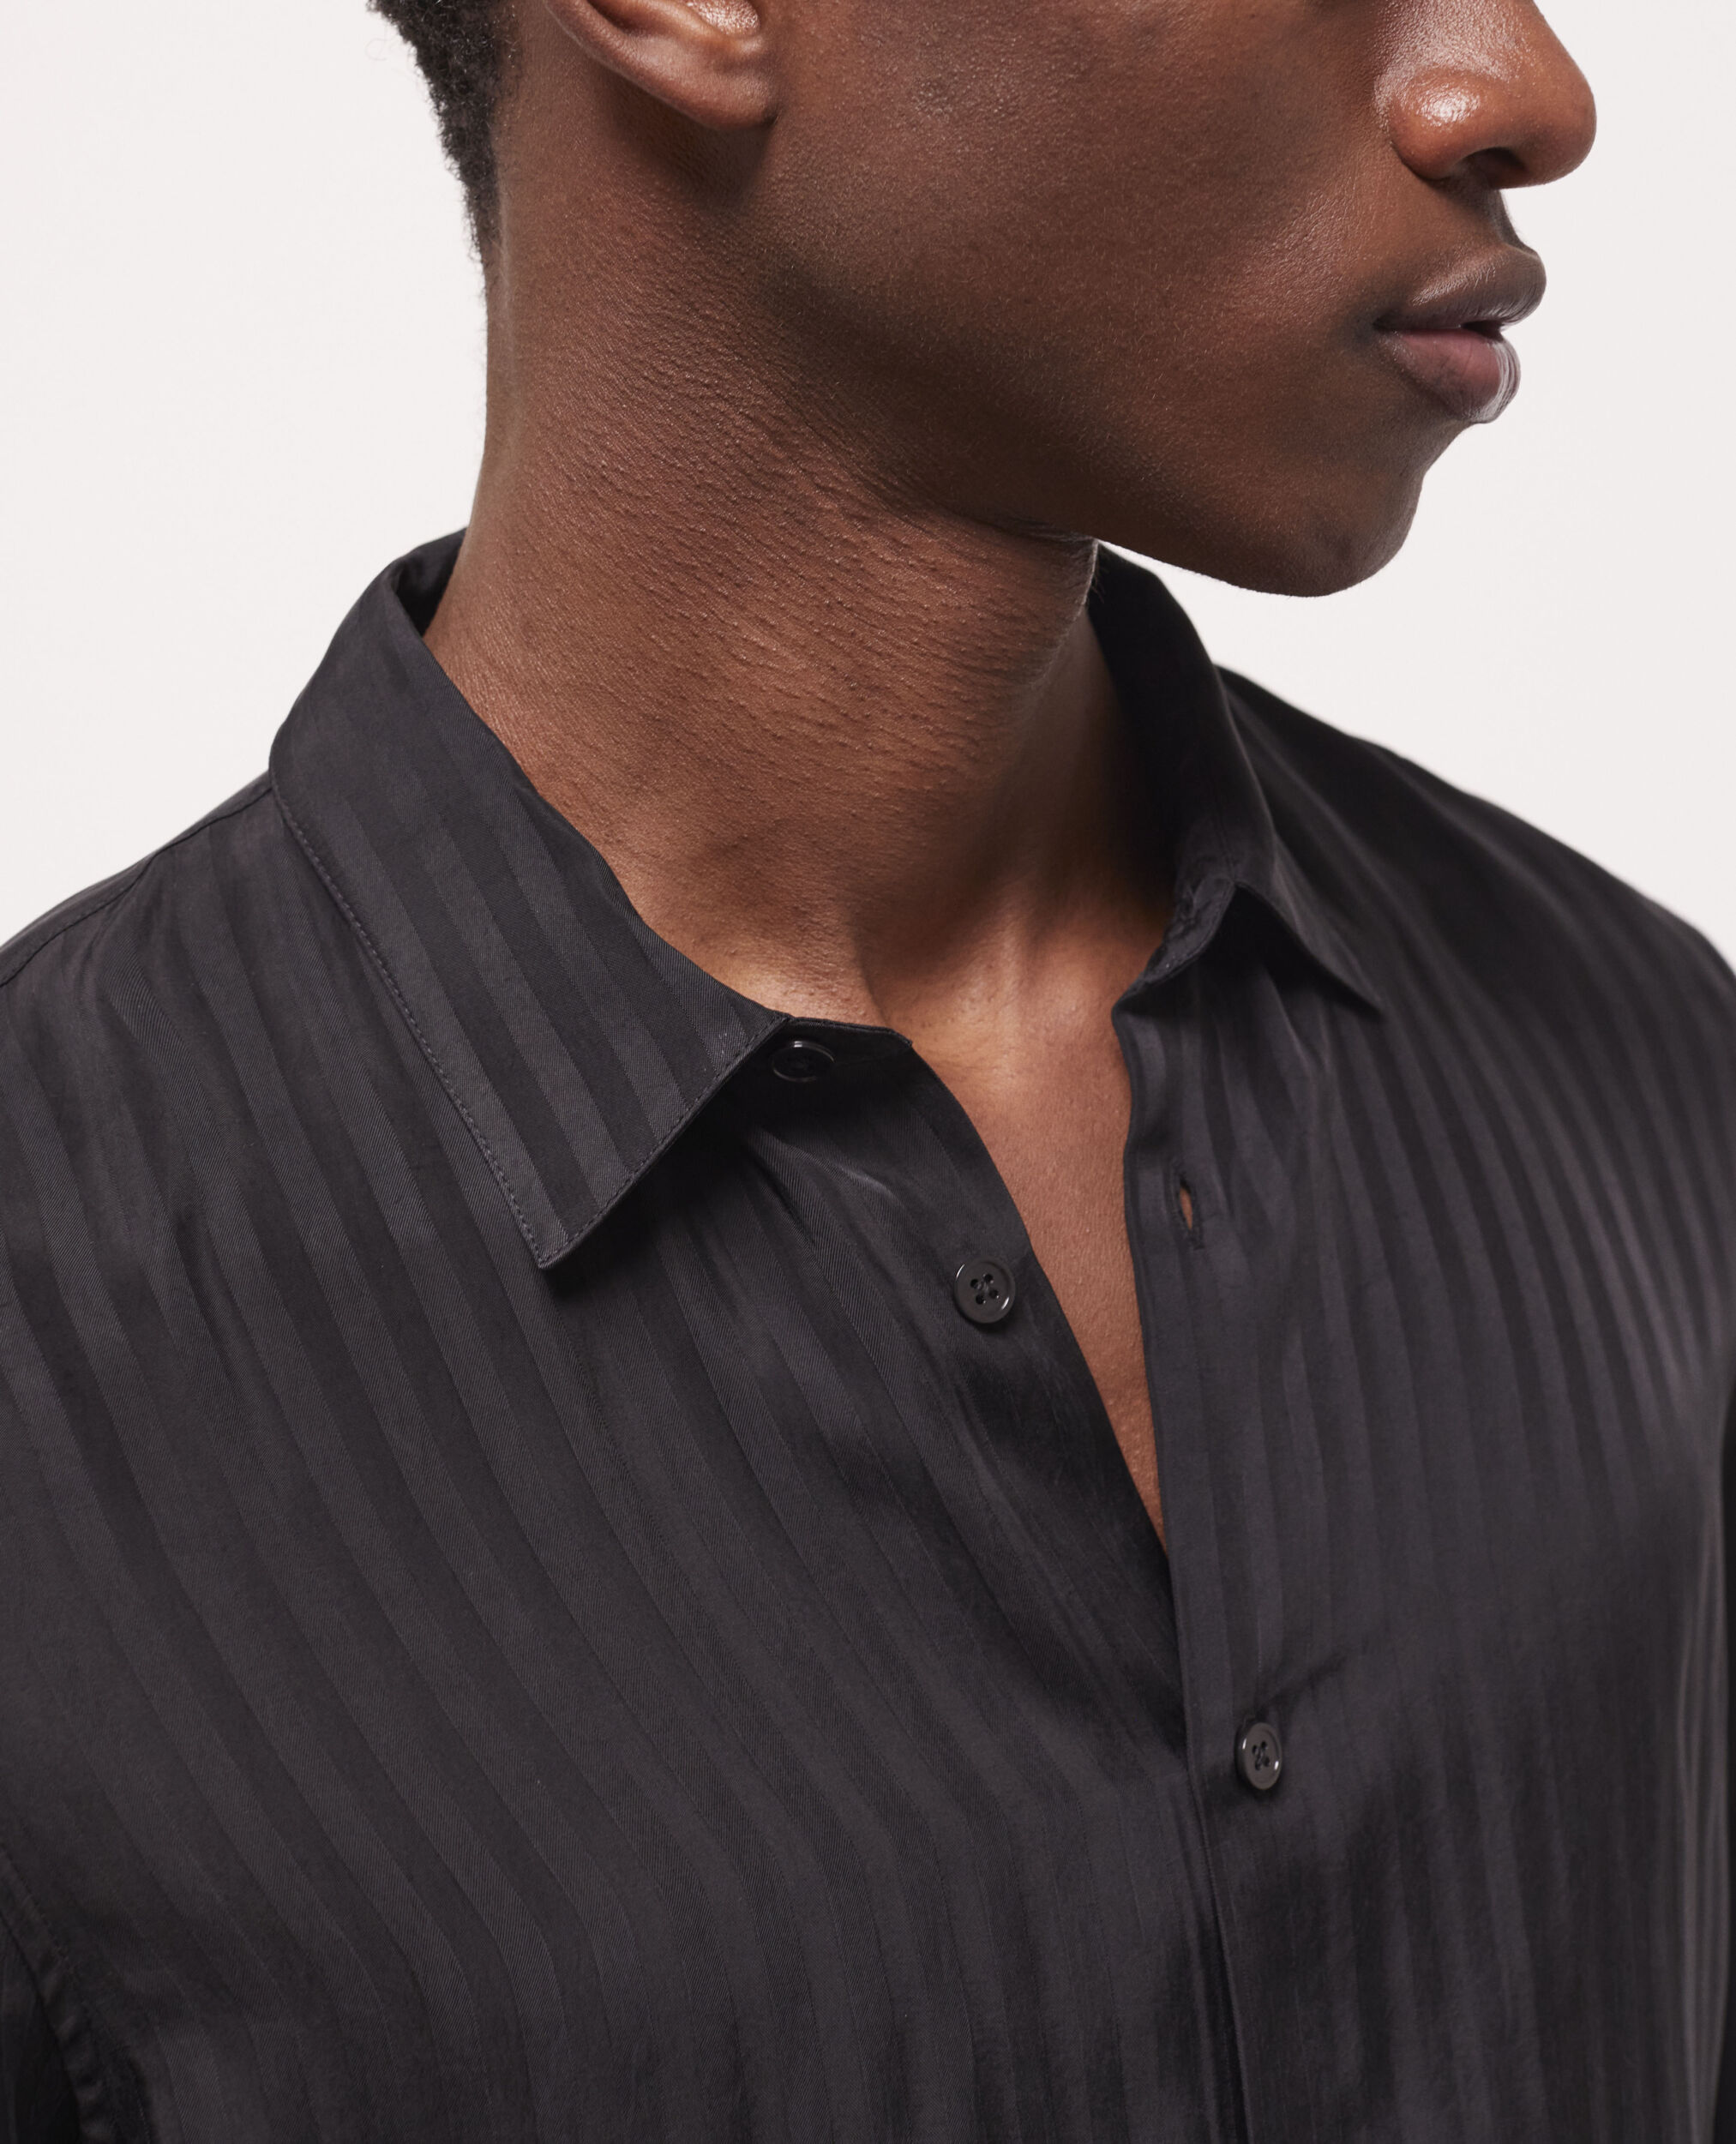 Black striped shirt with classic collar | The Kooples - US